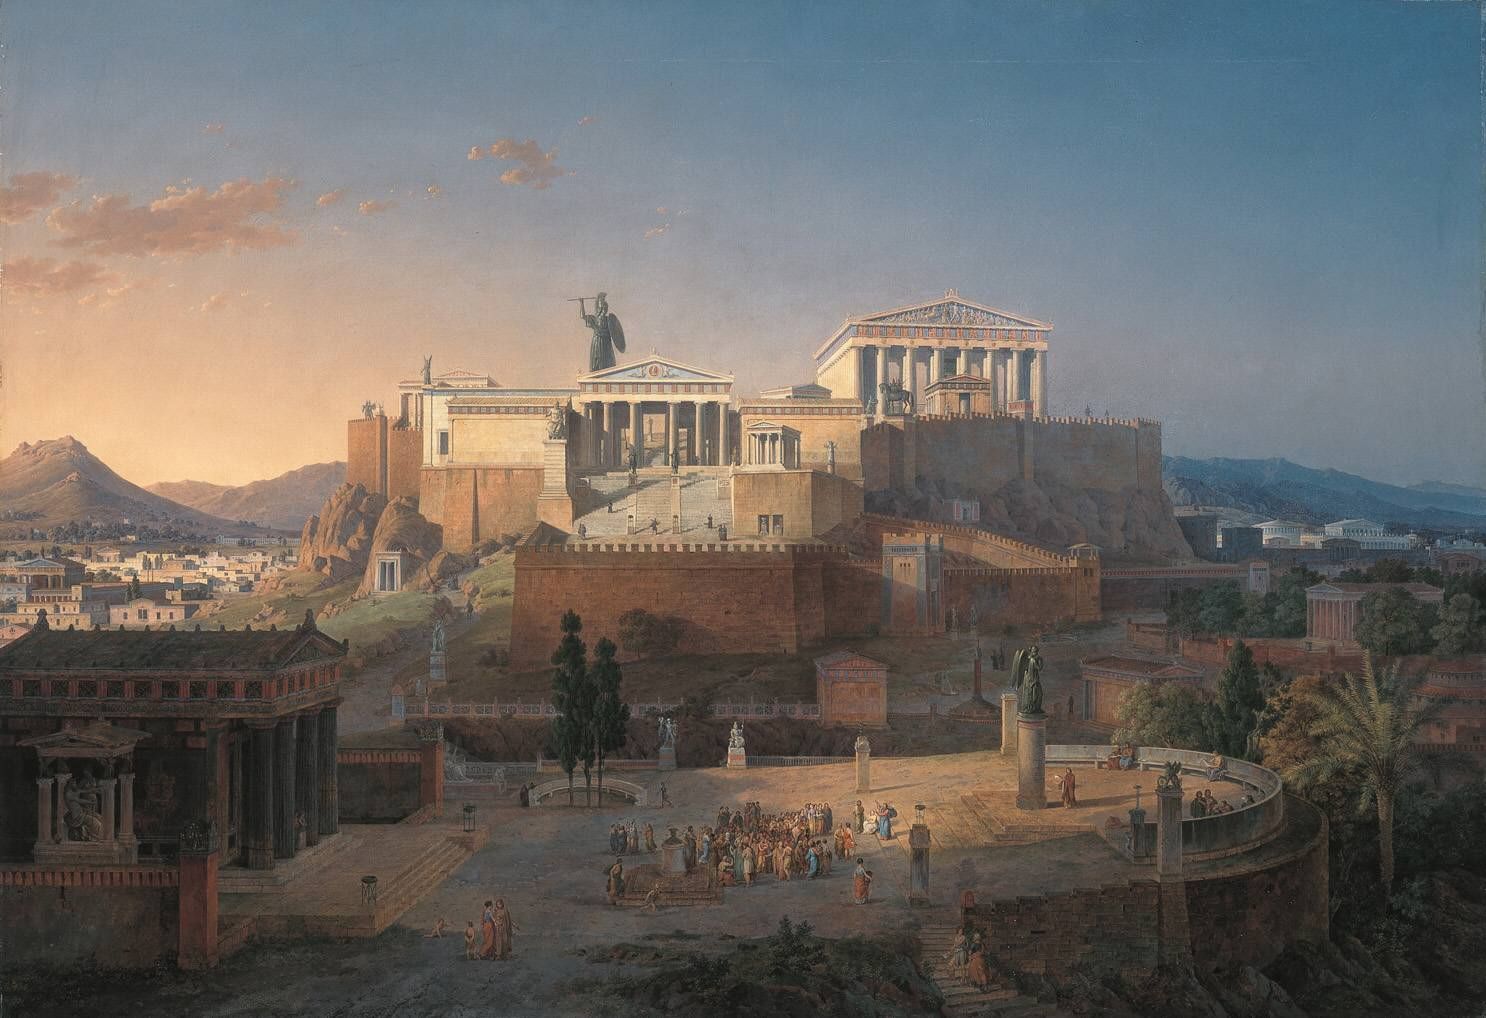 Leo von Klenze: Reconstruction of the Acropolis and Areopagus in Athens. 1846